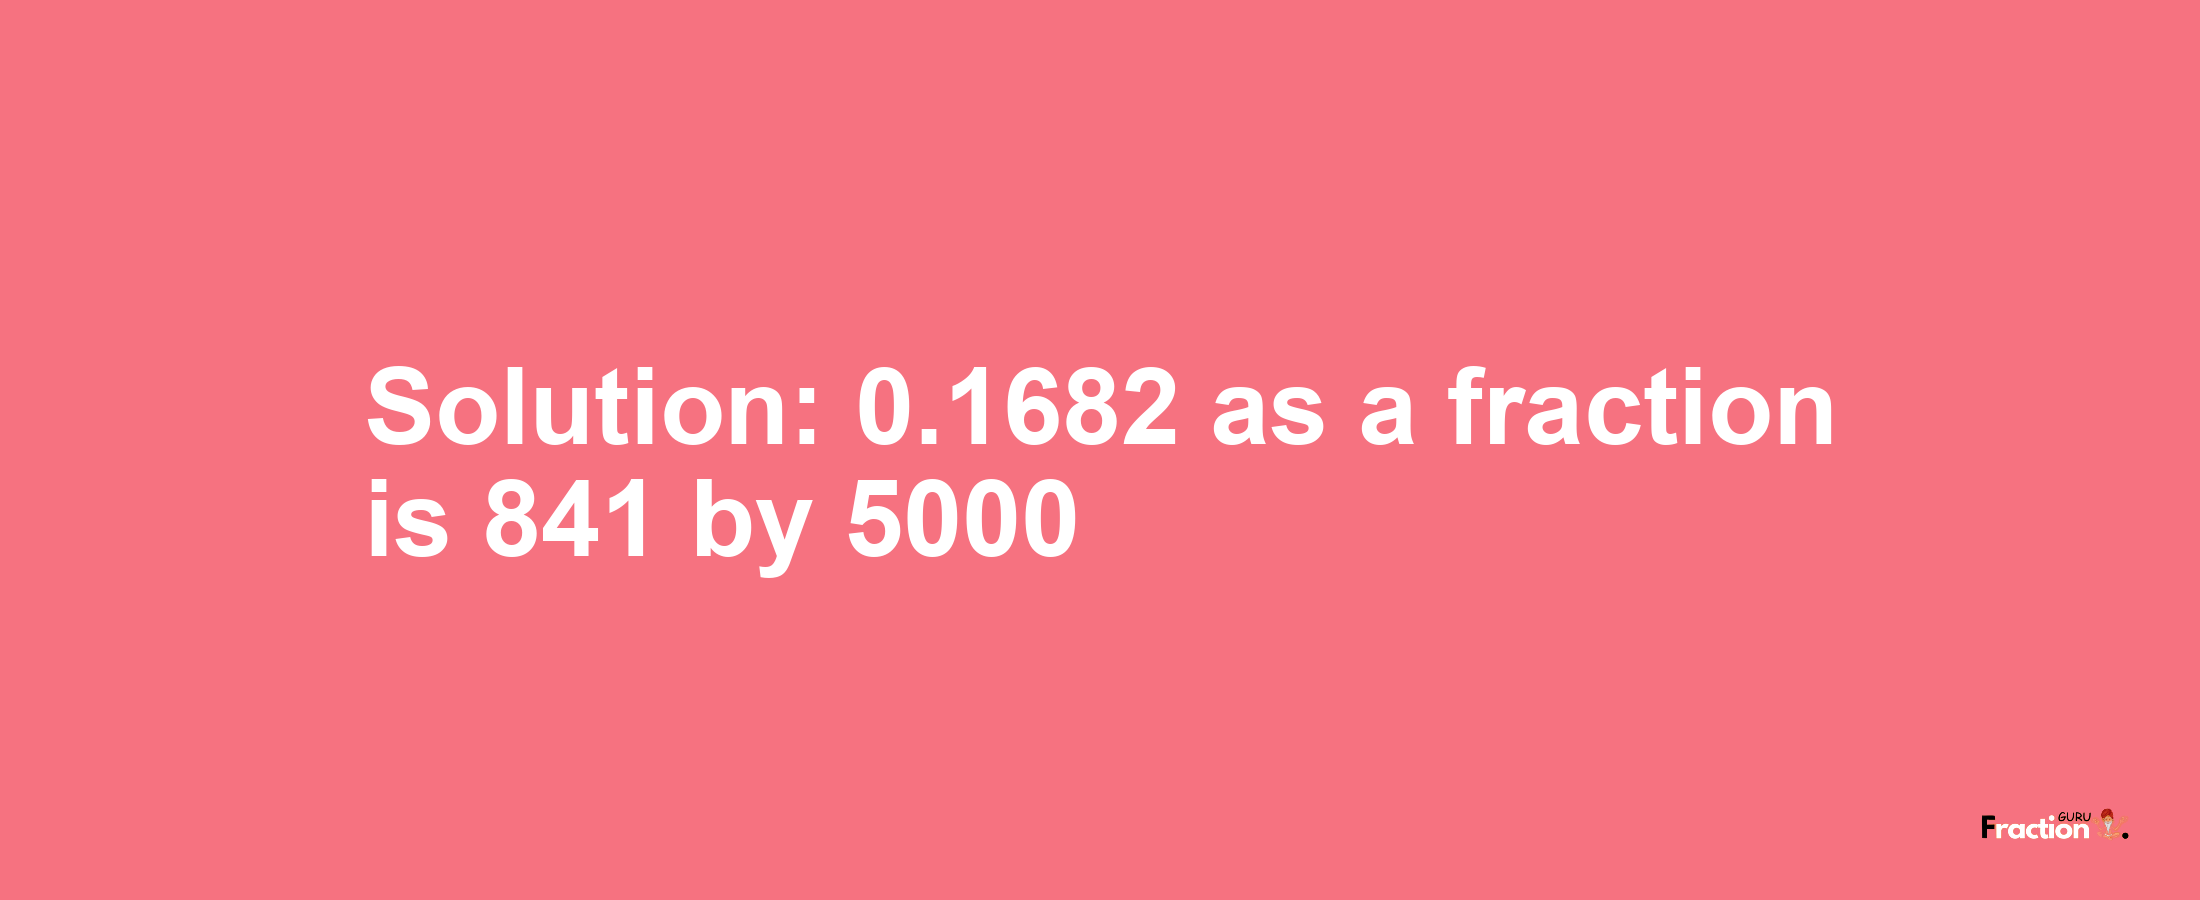 Solution:0.1682 as a fraction is 841/5000